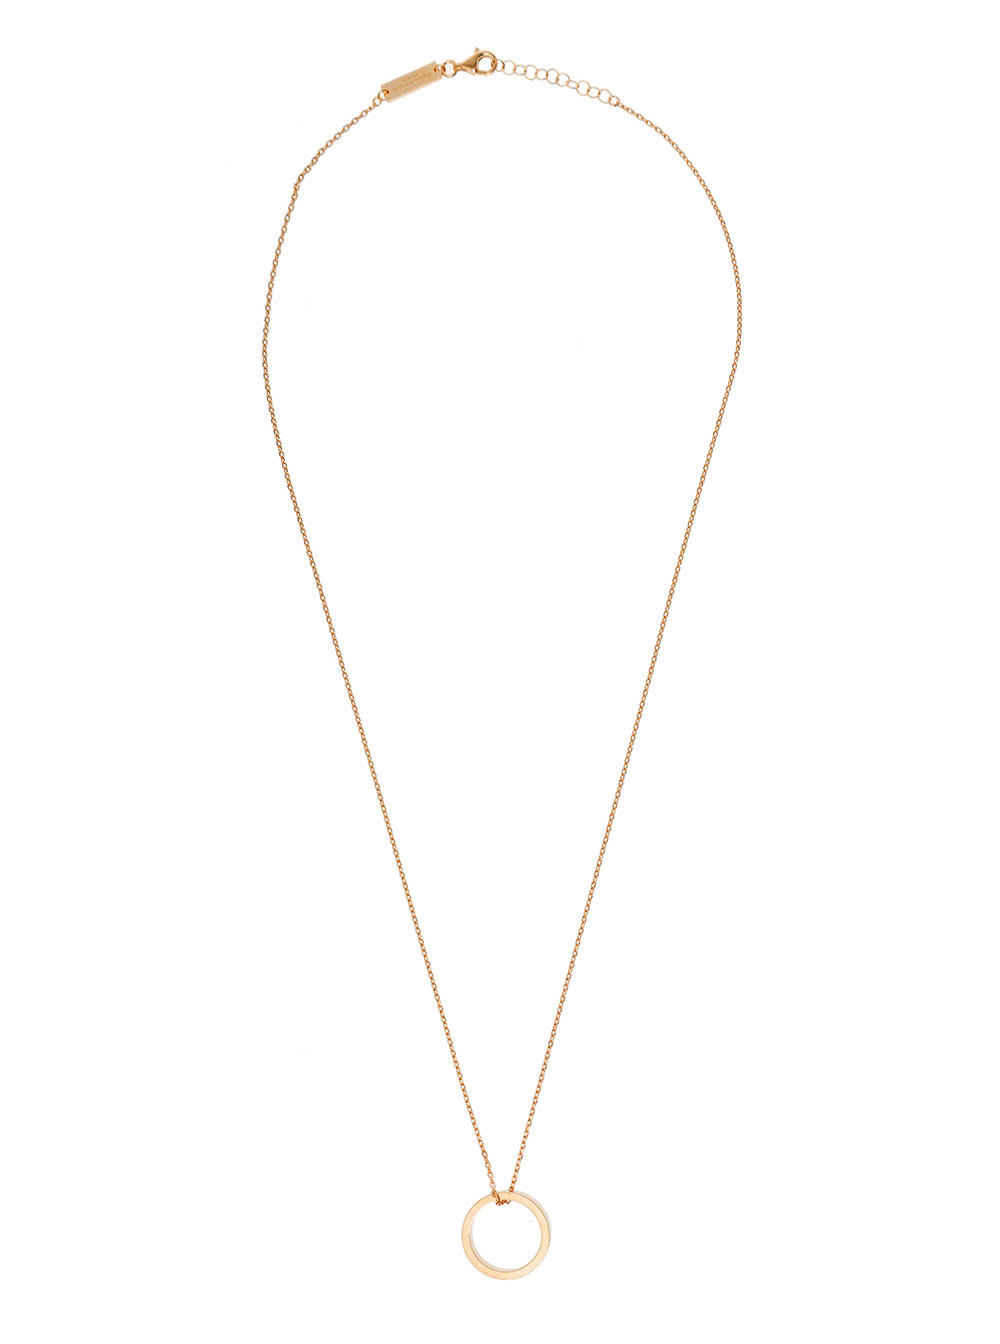 Maison Margiela Womans Gold Colored Silver Necklace With Round Pendant